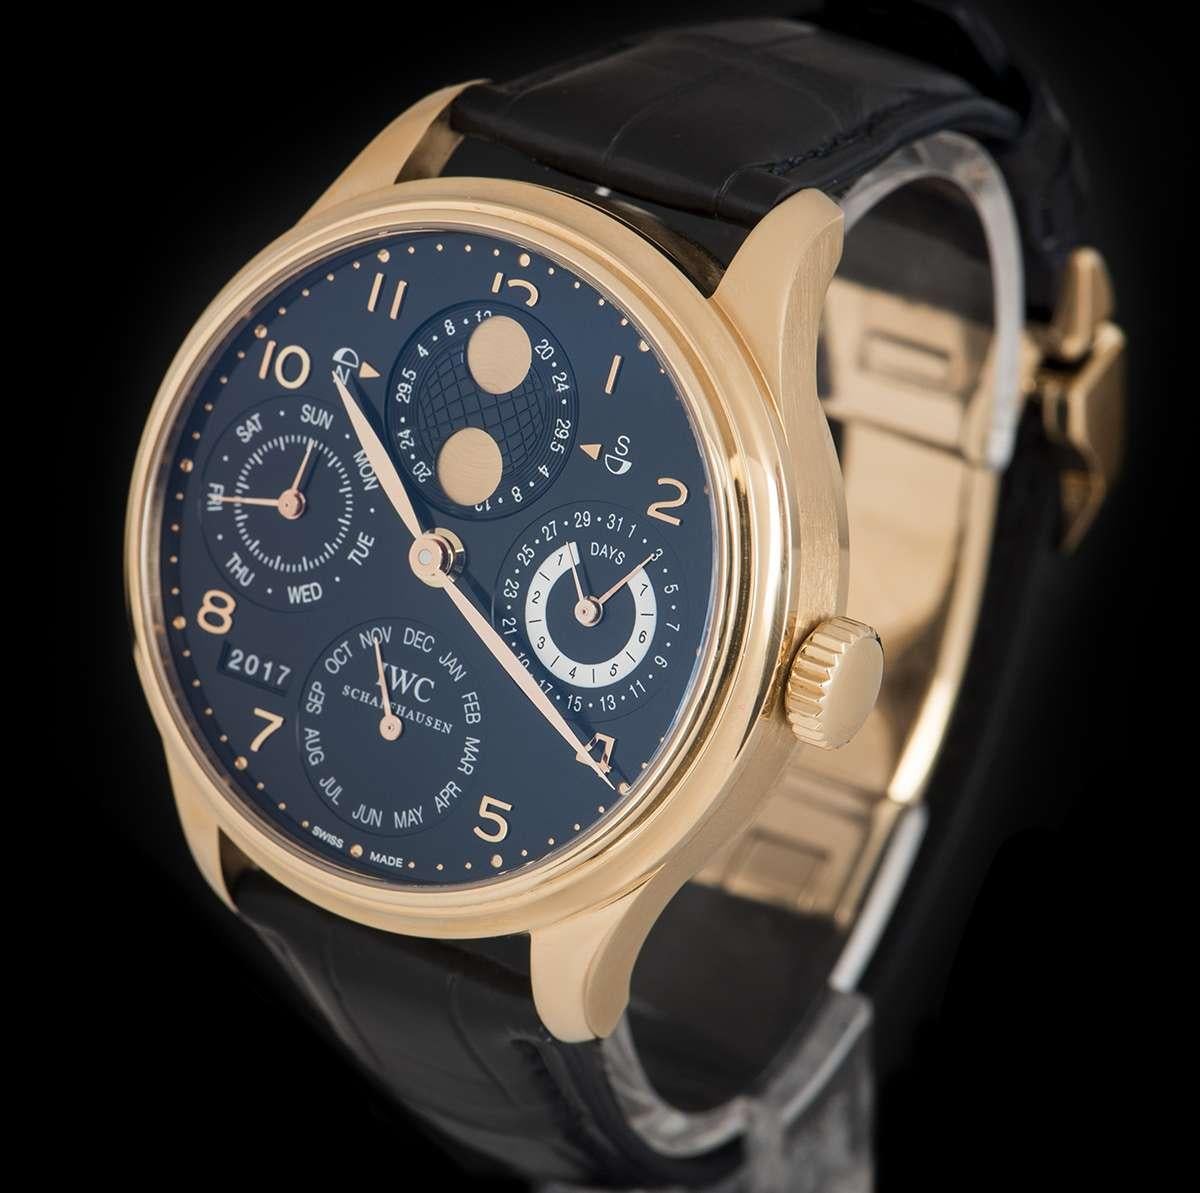 An 18k Rose Gold Portugieser Perpetual Calendar Gents Wristwatch, black dial with applied arabic numbers, date sub-dial and 7 day power reserve indicator at 3 0'clock, month sub-dial at 6 0'clock, year aperture between 7 and 8 0'clock, small seconds